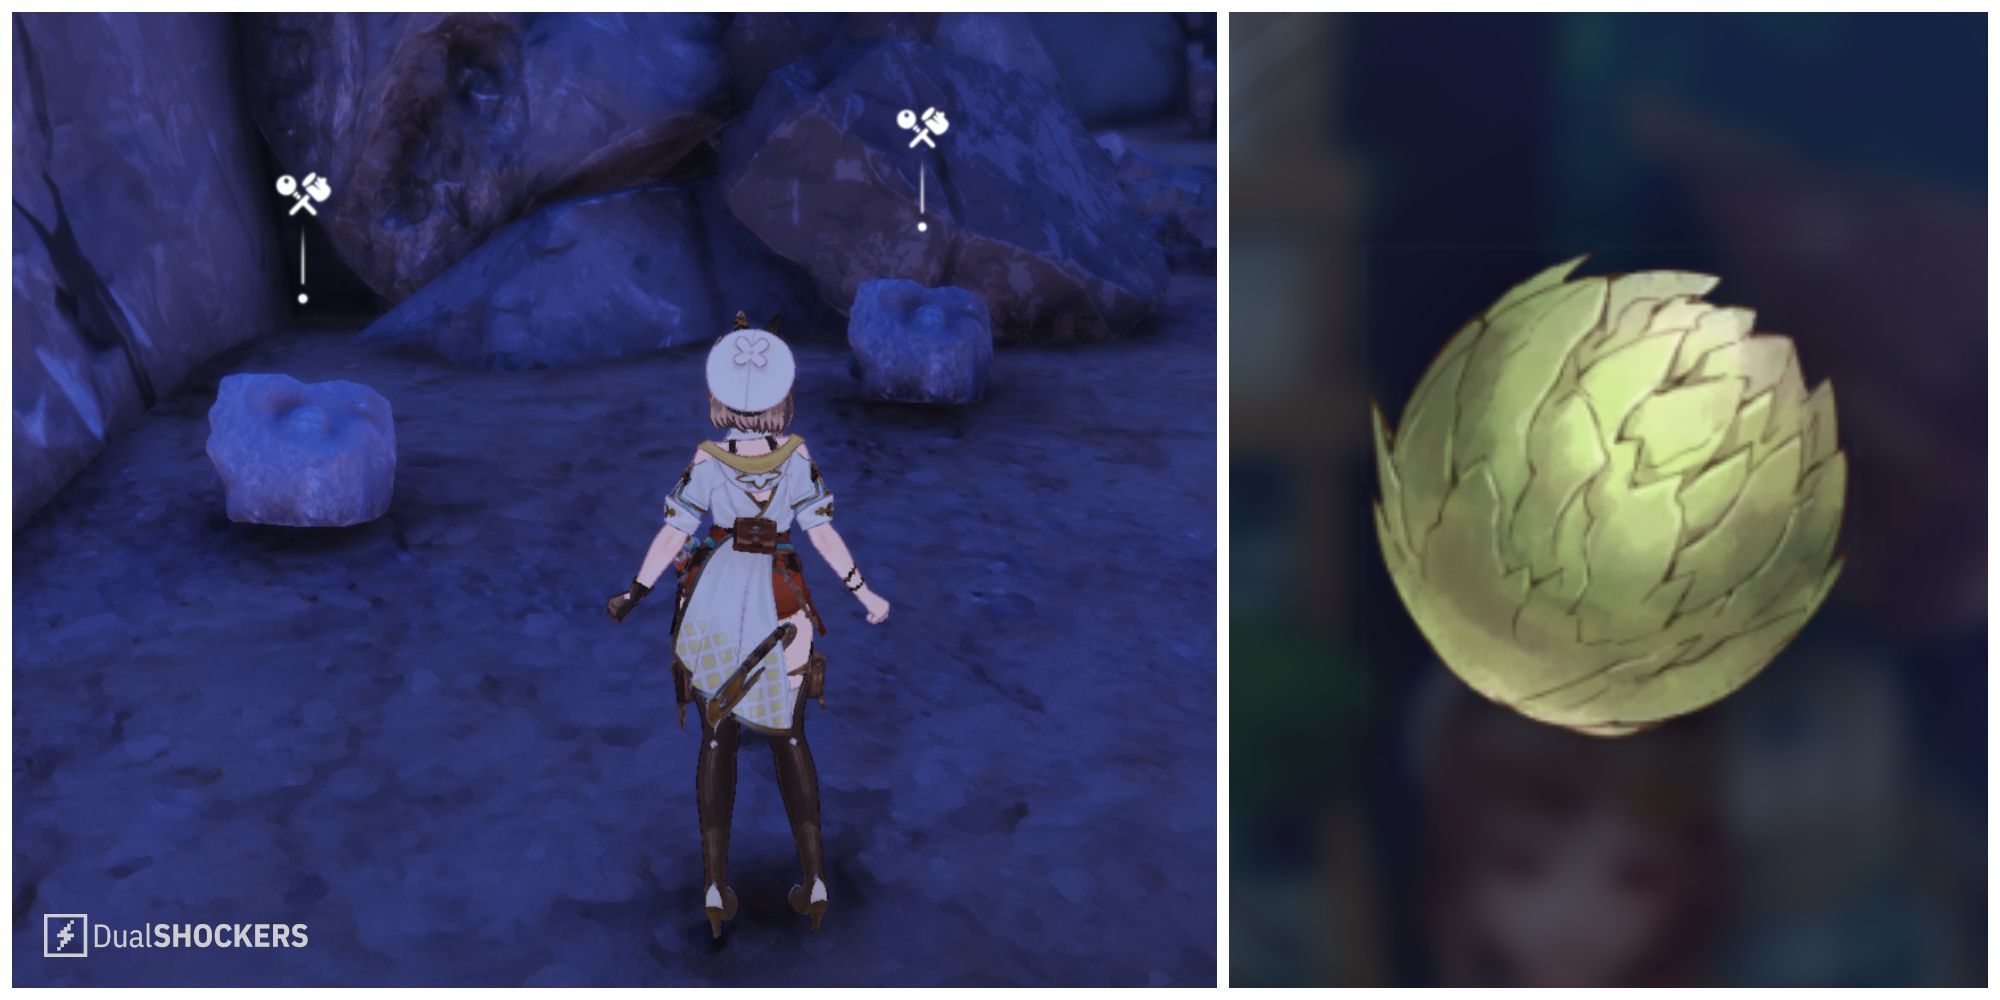 Split image of Wind Ore in the wild and Wind Ore in the basket in Atelier Ryza 3.